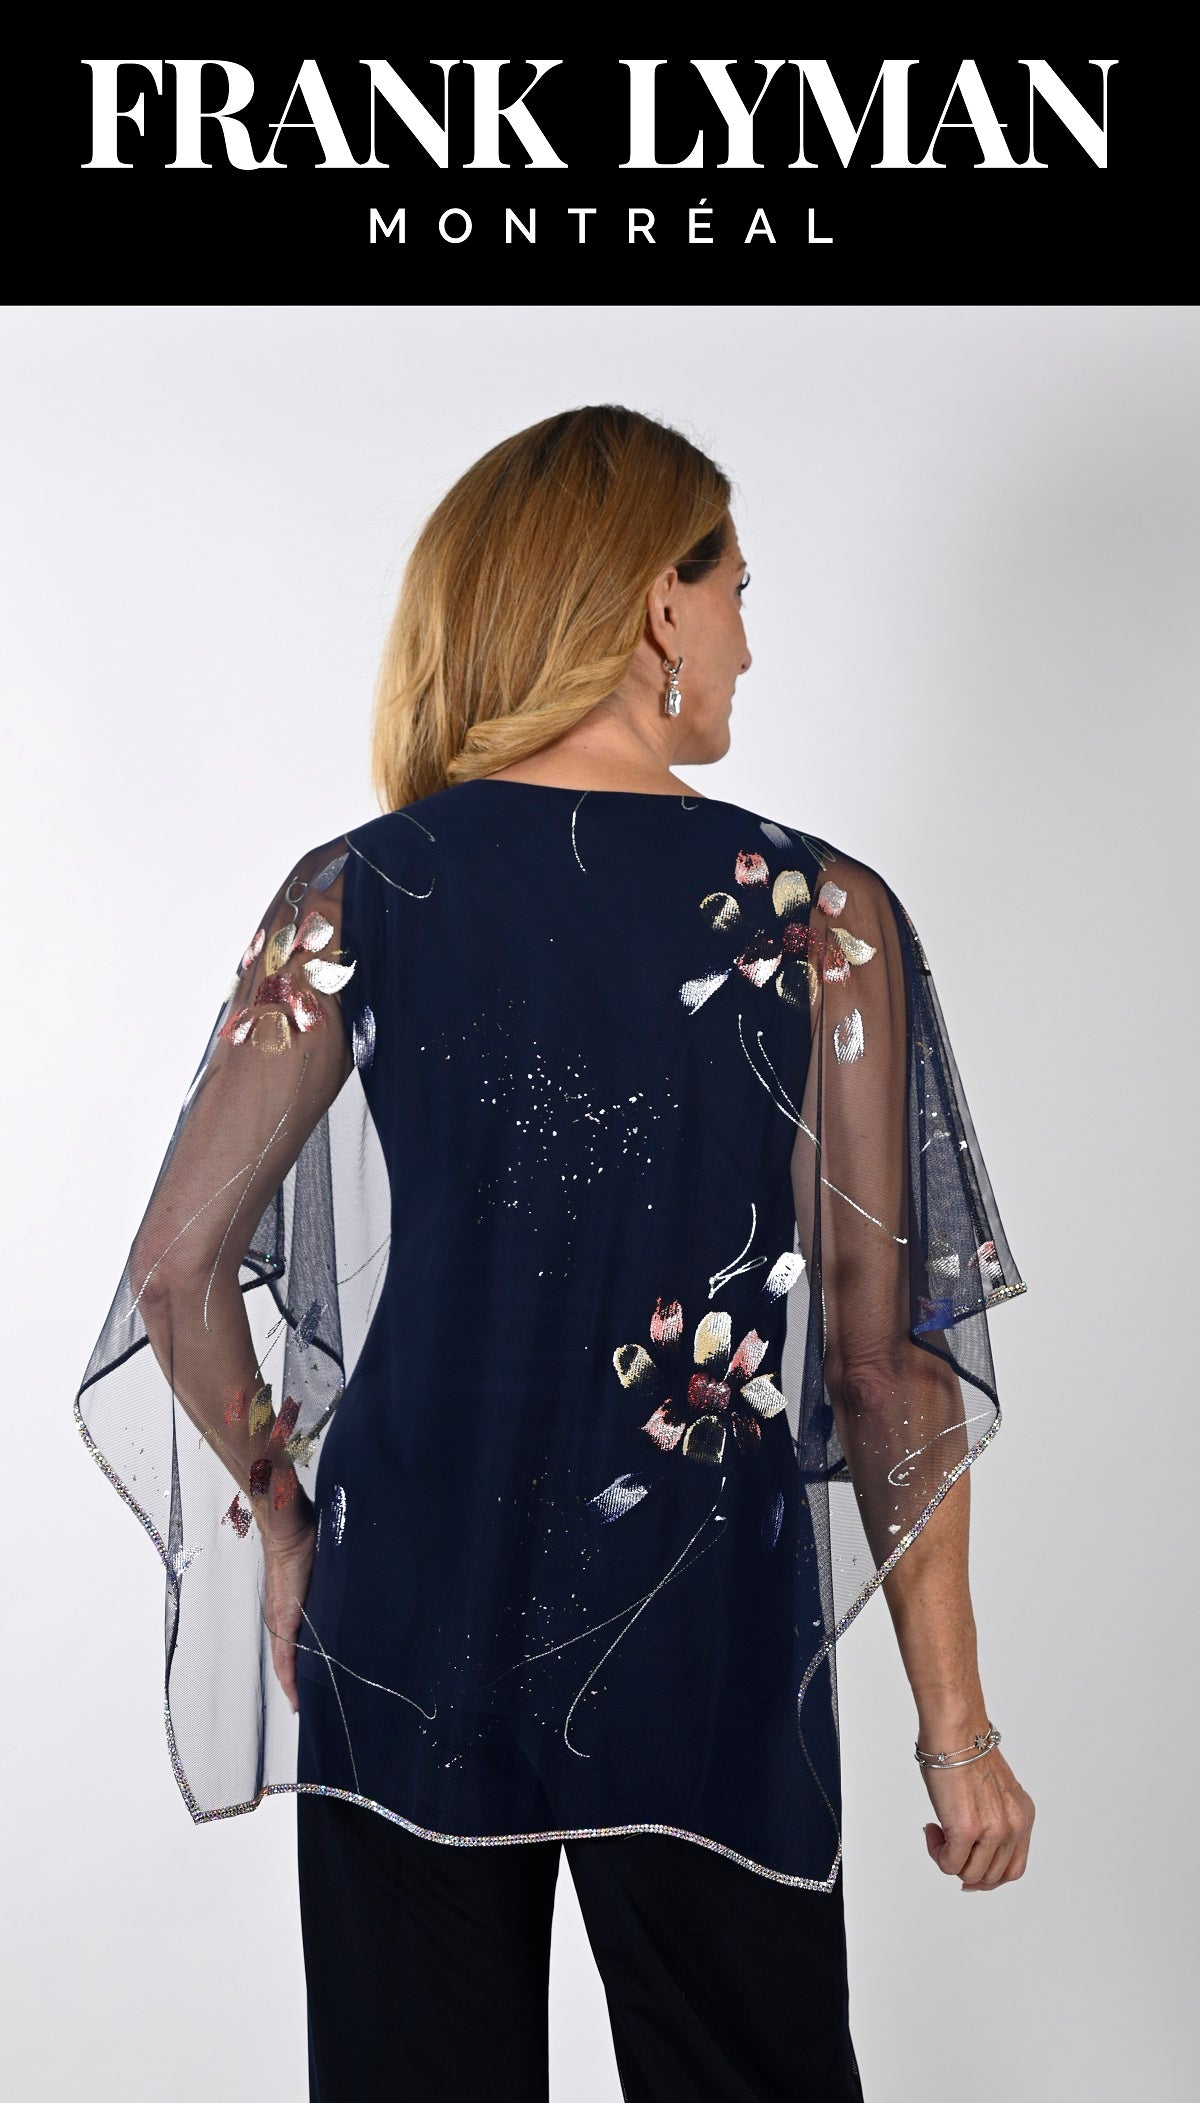 Frank Lyman Montreal Midnight Special Occasion Top-Buy Frank Lyman Montreal Evening Wear Online-Frank Lyman Montreal Party Top-Frank Lyman Montreal Clothing Online